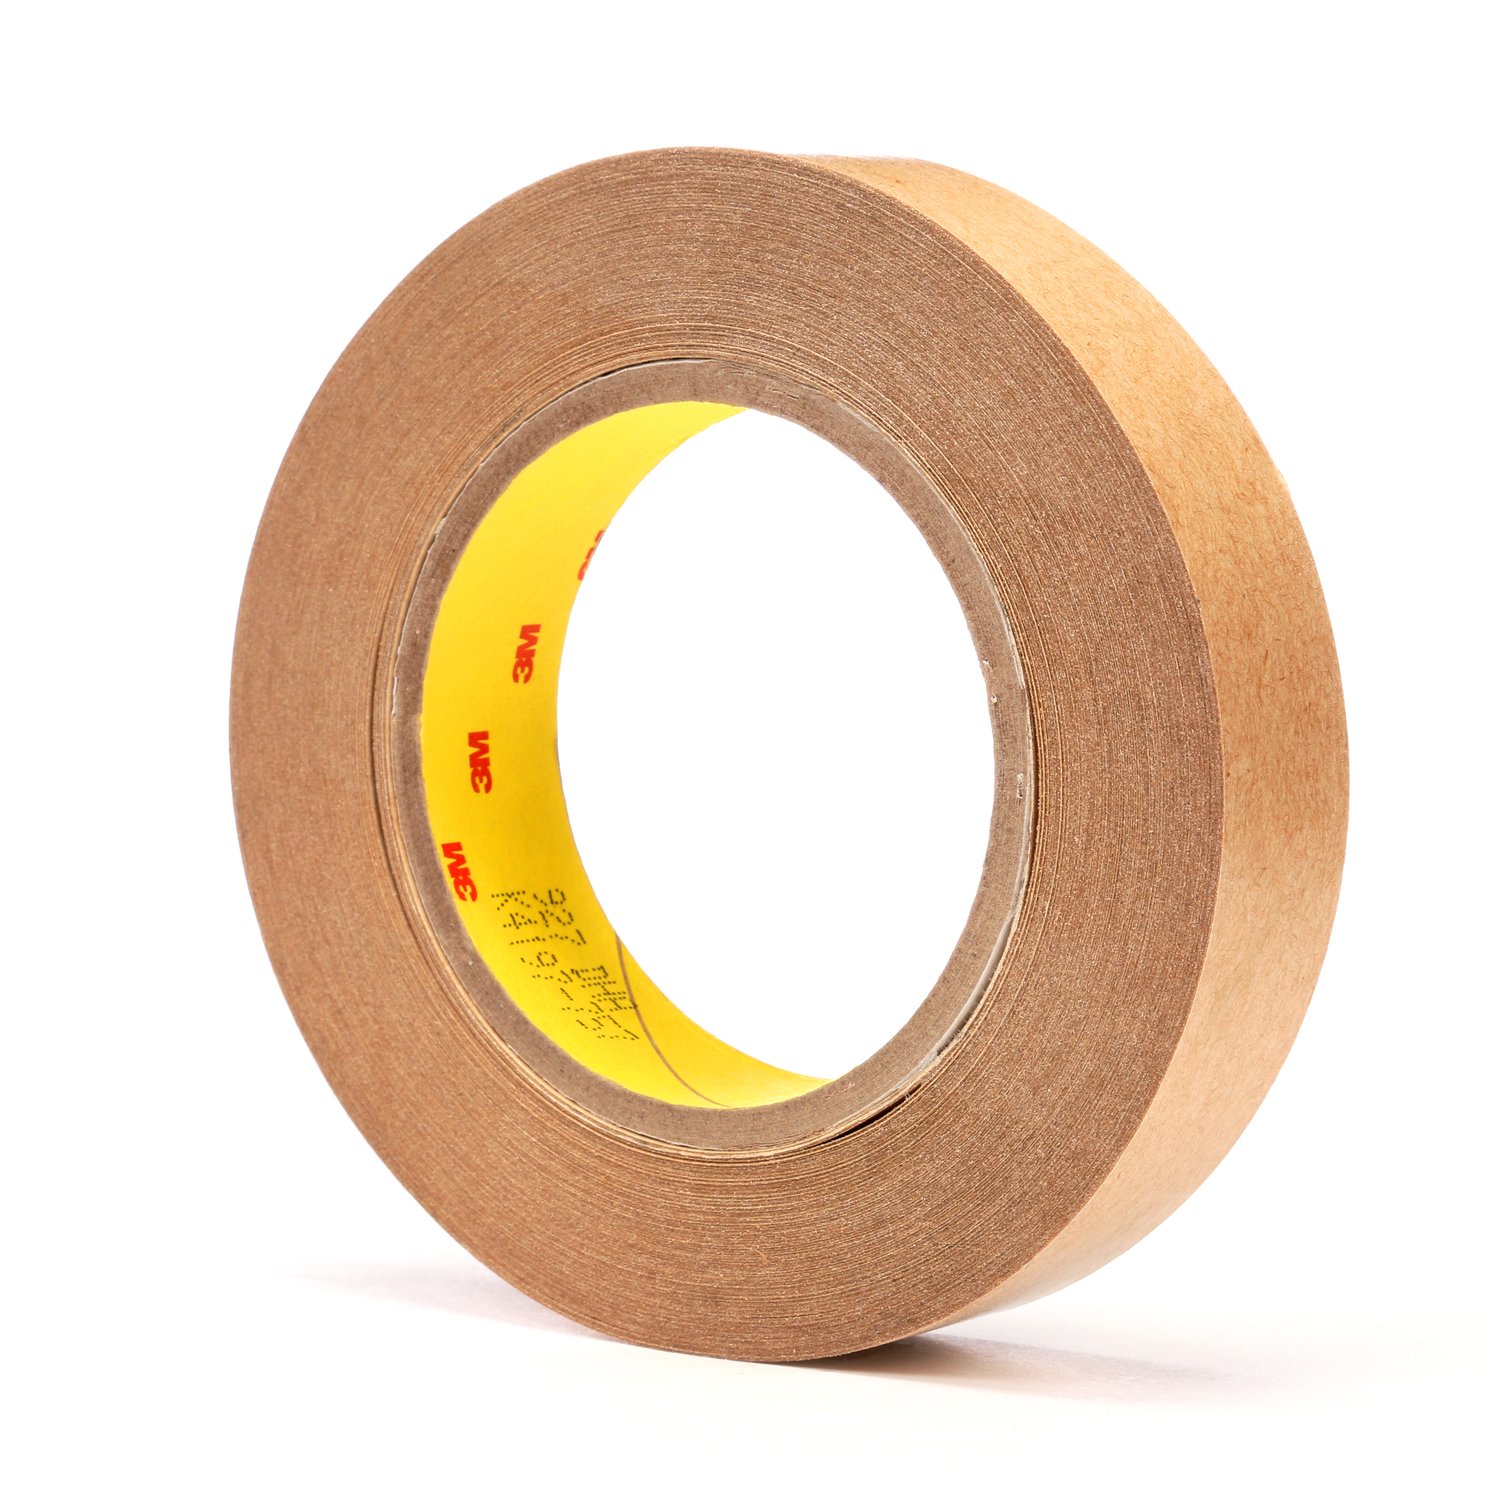 7010302012 - 3M Adhesive Transfer Tape 927, Clear, 1 in x 60 yd, 2 mil, 36 rolls per
case